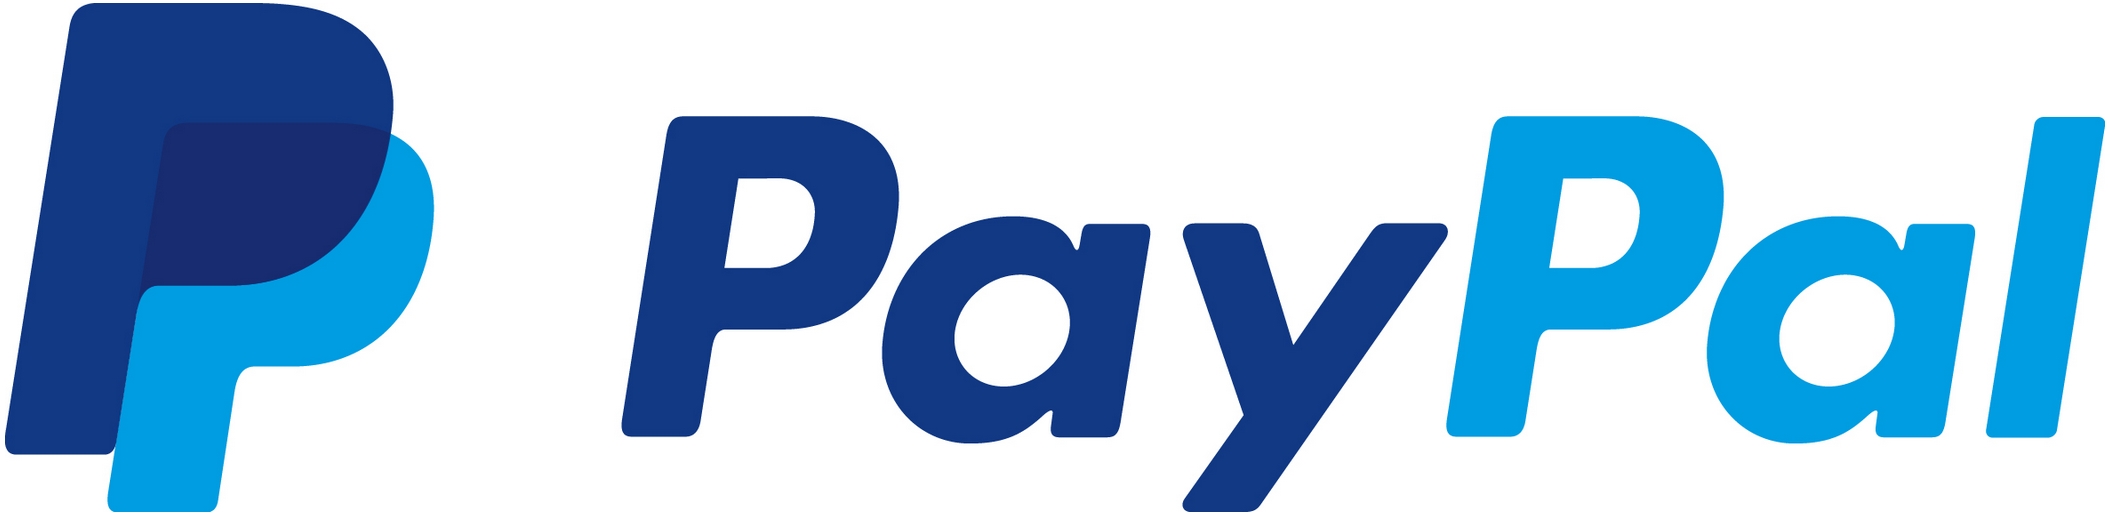 Paypal Logo Clipart.